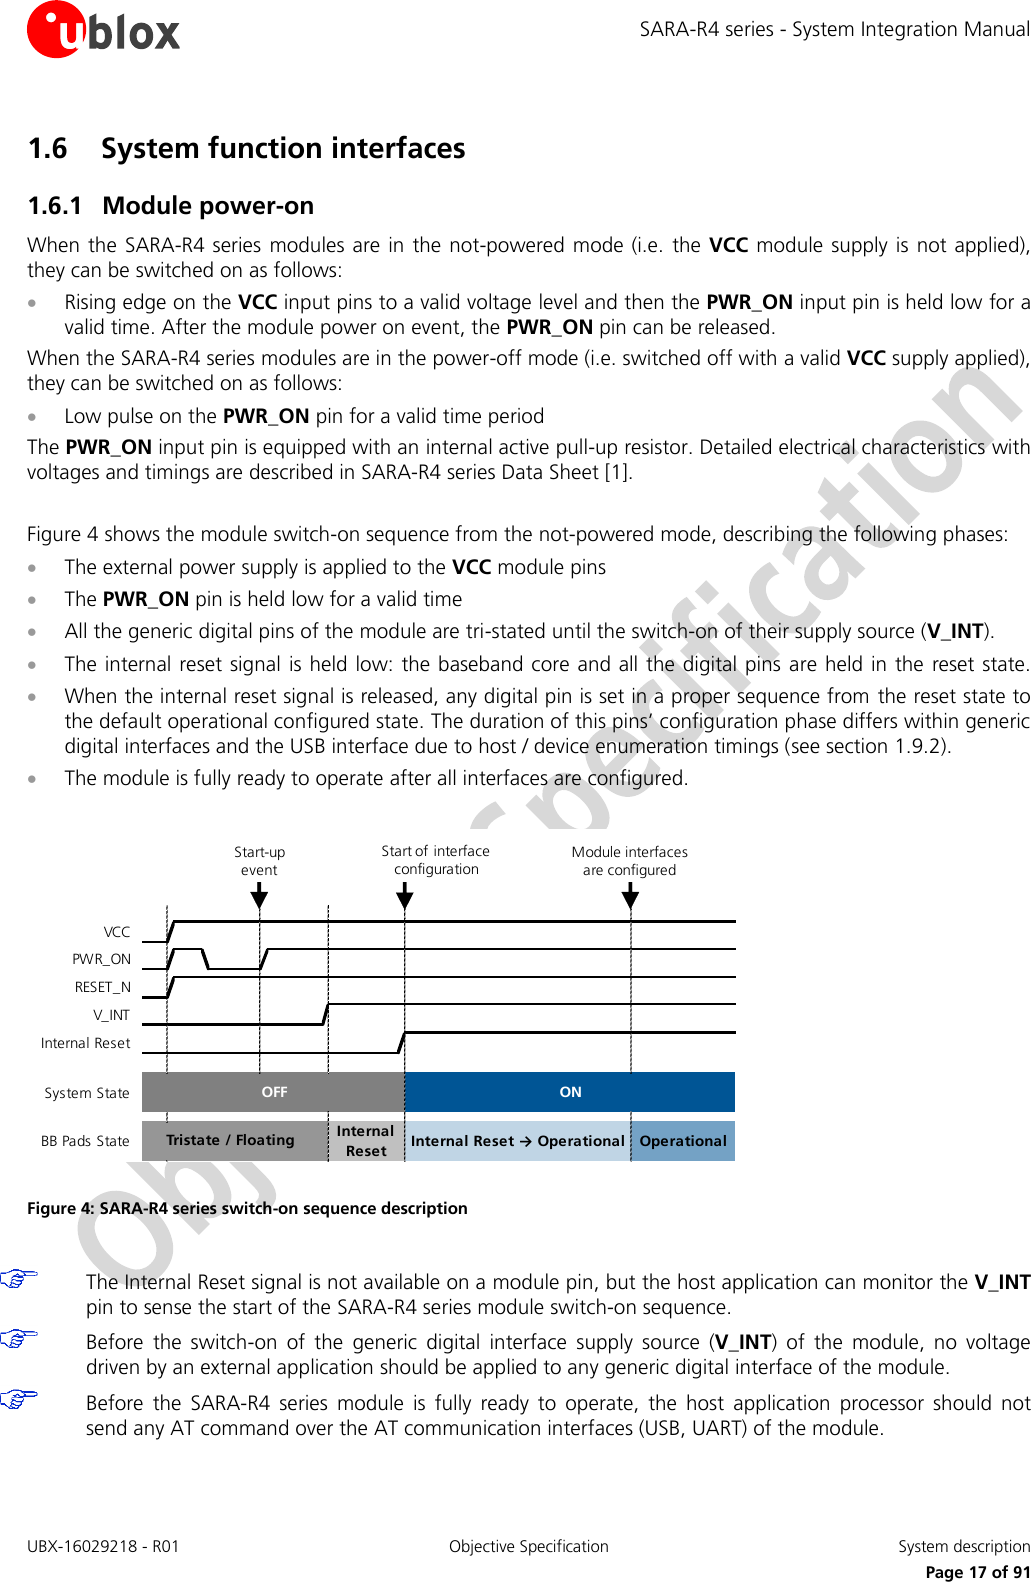 SARA-R4 series - System Integration Manual UBX-16029218 - R01  Objective Specification  System description     Page 17 of 91 1.6 System function interfaces 1.6.1 Module power-on When the SARA-R4 series  modules are in the not-powered mode  (i.e.  the VCC module supply is not applied), they can be switched on as follows:  Rising edge on the VCC input pins to a valid voltage level and then the PWR_ON input pin is held low for a valid time. After the module power on event, the PWR_ON pin can be released. When the SARA-R4 series modules are in the power-off mode (i.e. switched off with a valid VCC supply applied), they can be switched on as follows:  Low pulse on the PWR_ON pin for a valid time period The PWR_ON input pin is equipped with an internal active pull-up resistor. Detailed electrical characteristics with voltages and timings are described in SARA-R4 series Data Sheet [1].  Figure 4 shows the module switch-on sequence from the not-powered mode, describing the following phases:  The external power supply is applied to the VCC module pins  The PWR_ON pin is held low for a valid time  All the generic digital pins of the module are tri-stated until the switch-on of their supply source (V_INT).  The internal reset signal is held low: the  baseband core and all the digital pins are held in the reset state.  When the internal reset signal is released, any digital pin is set in a proper sequence from the reset state to the default operational configured state. The duration of this pins’ configuration phase differs within generic digital interfaces and the USB interface due to host / device enumeration timings (see section 1.9.2).  The module is fully ready to operate after all interfaces are configured.     Figure 4: SARA-R4 series switch-on sequence description   The Internal Reset signal is not available on a module pin, but the host application can monitor the V_INT pin to sense the start of the SARA-R4 series module switch-on sequence.  Before  the  switch-on  of  the  generic  digital  interface  supply  source  (V_INT)  of  the  module,  no  voltage driven by an external application should be applied to any generic digital interface of the module.  Before  the  SARA-R4  series  module  is  fully  ready  to  operate,  the  host  application  processor  should  not send any AT command over the AT communication interfaces (USB, UART) of the module.  VCCPWR_ONRESET_NV_INTInternal ResetSystem StateBB Pads StateInternal Reset → Operational OperationalTristate / Floating Internal ResetOFFONStart of interface configurationModule interfaces are configuredStart-up event